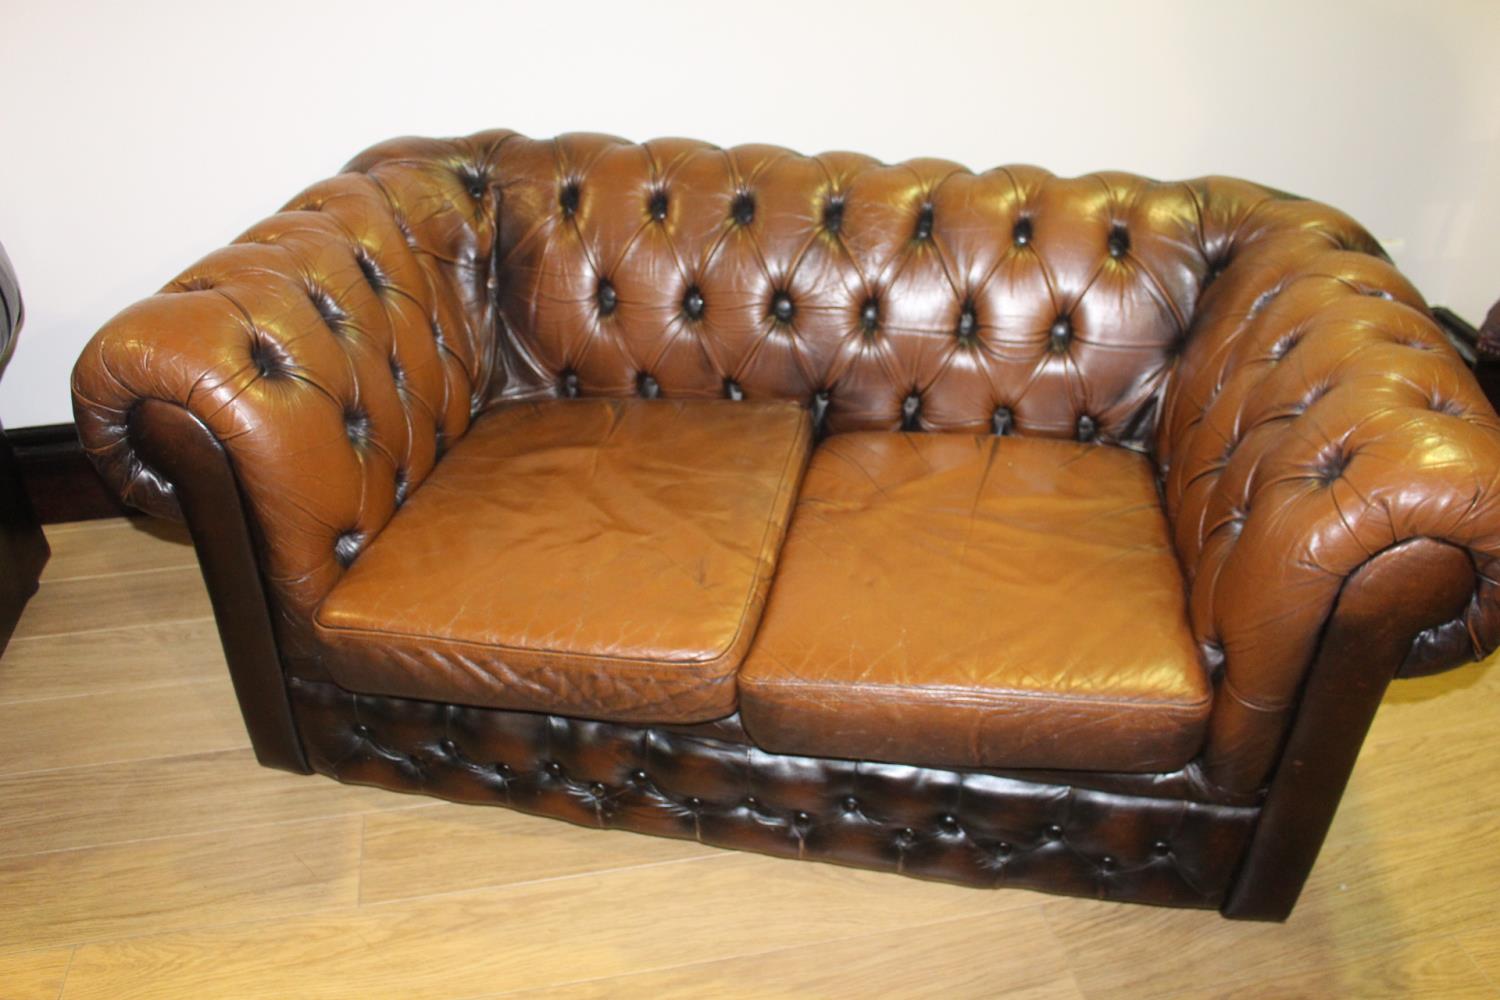 Excellent quality leather chesterfield three piece deep buttoned upholstered suite - Image 2 of 4